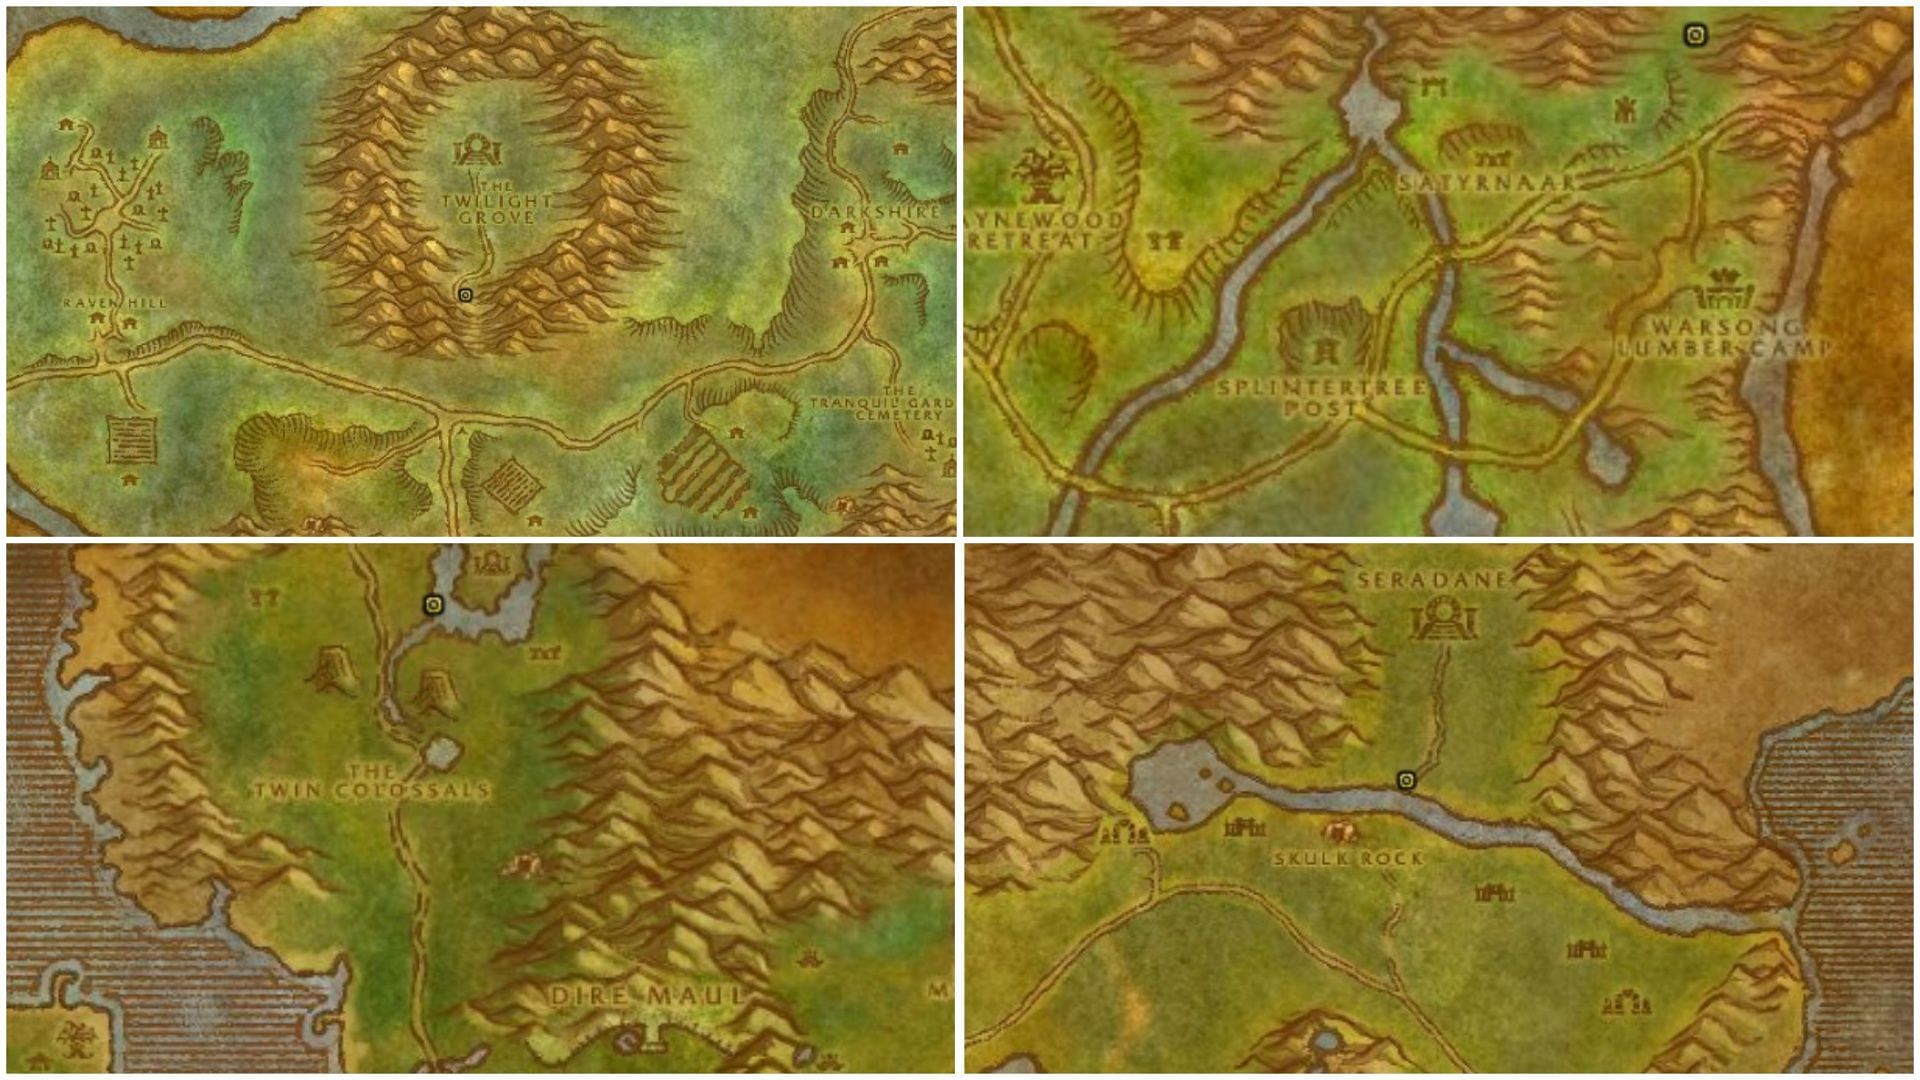 Locations of the Nightmare Incusions (top left to bottom right): Duskwood, Ashenvale, Feralas, The Hinterlands. (Image via Blizzard Entertainment)